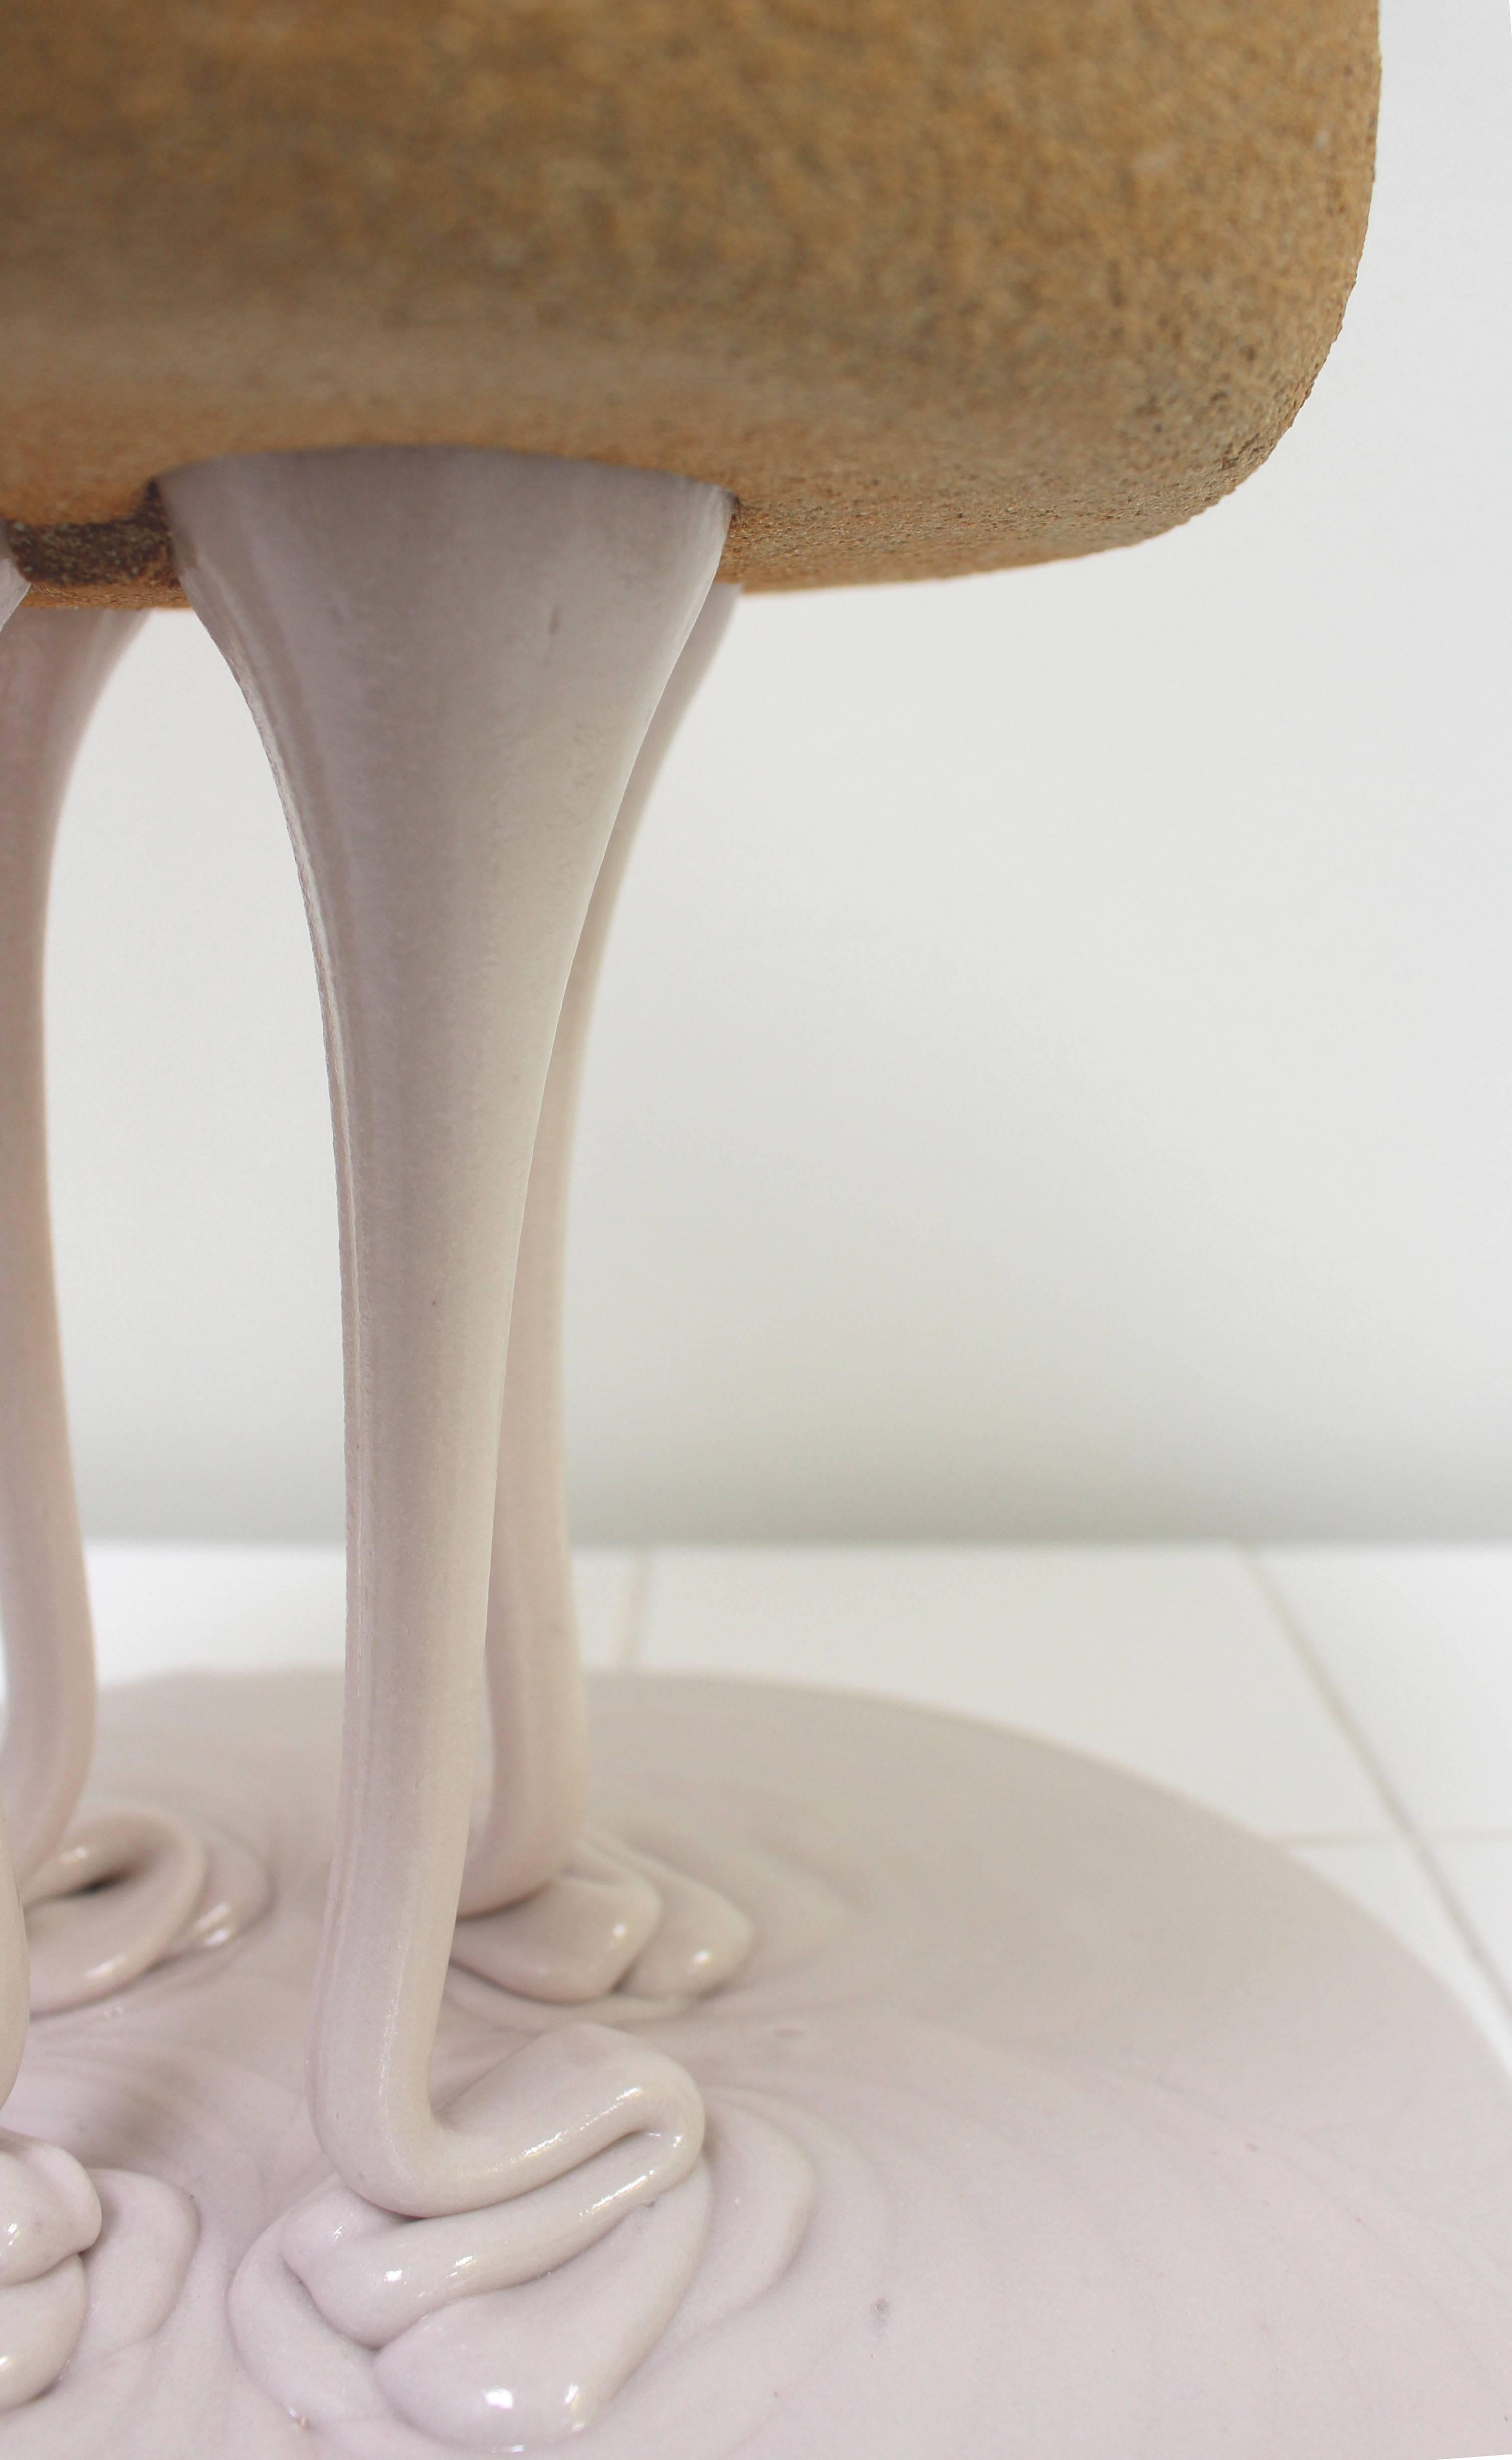 Clay and glaze, contemporary sculpture. Measure: H 40 cm.
Made by the Danish artist Christina Schou Christensen
Christina Schou Christensen generally views her works as experiments. She explores a field that is hard to control, and where the